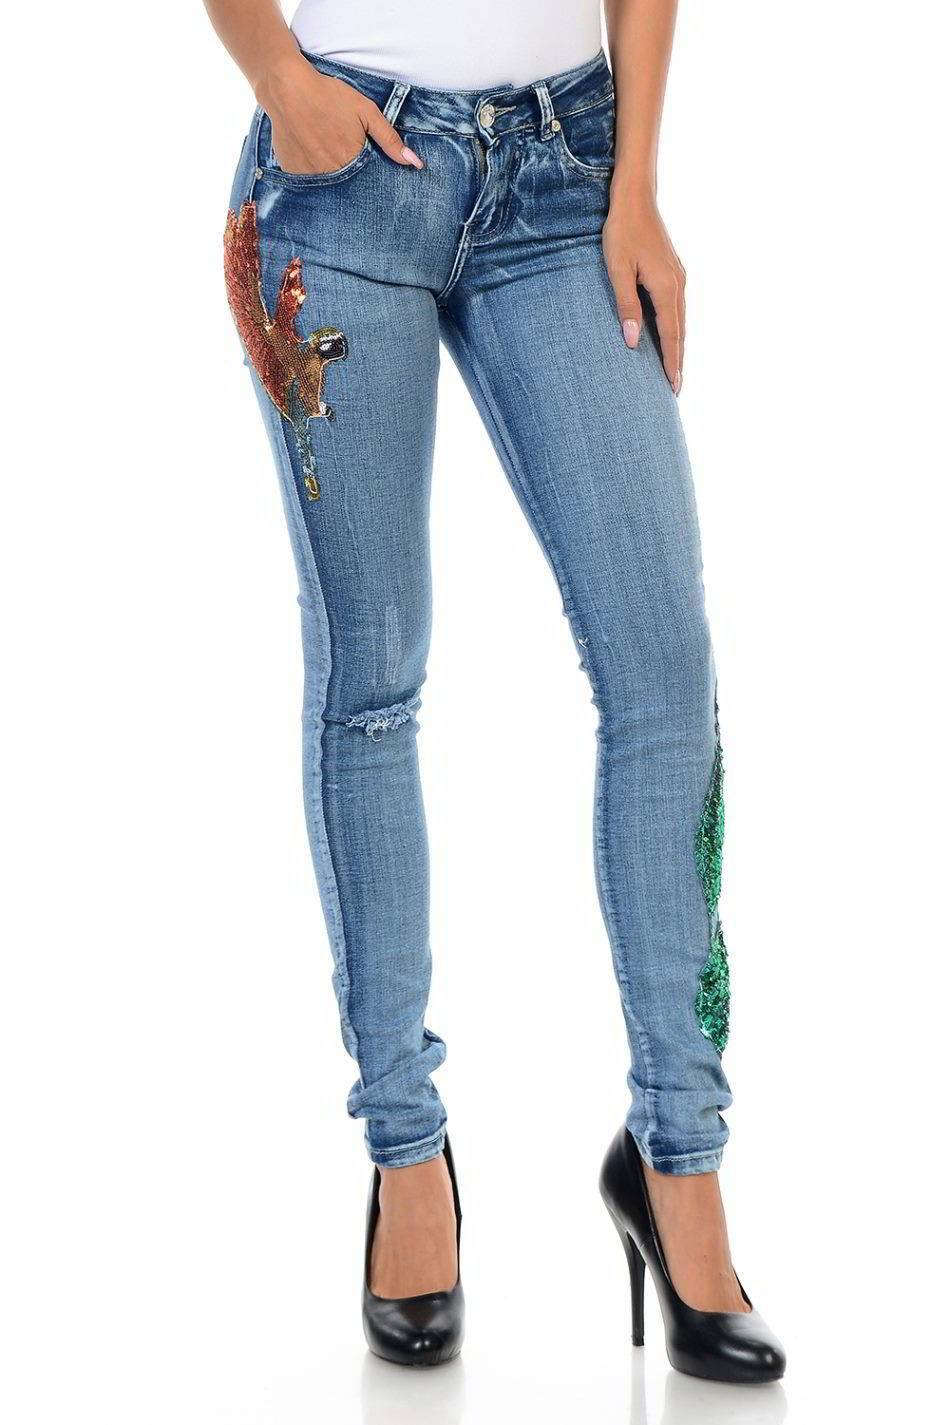 Sweet Look Premium Edition Women s Jeans Sizing 0 15 Style N2275 R